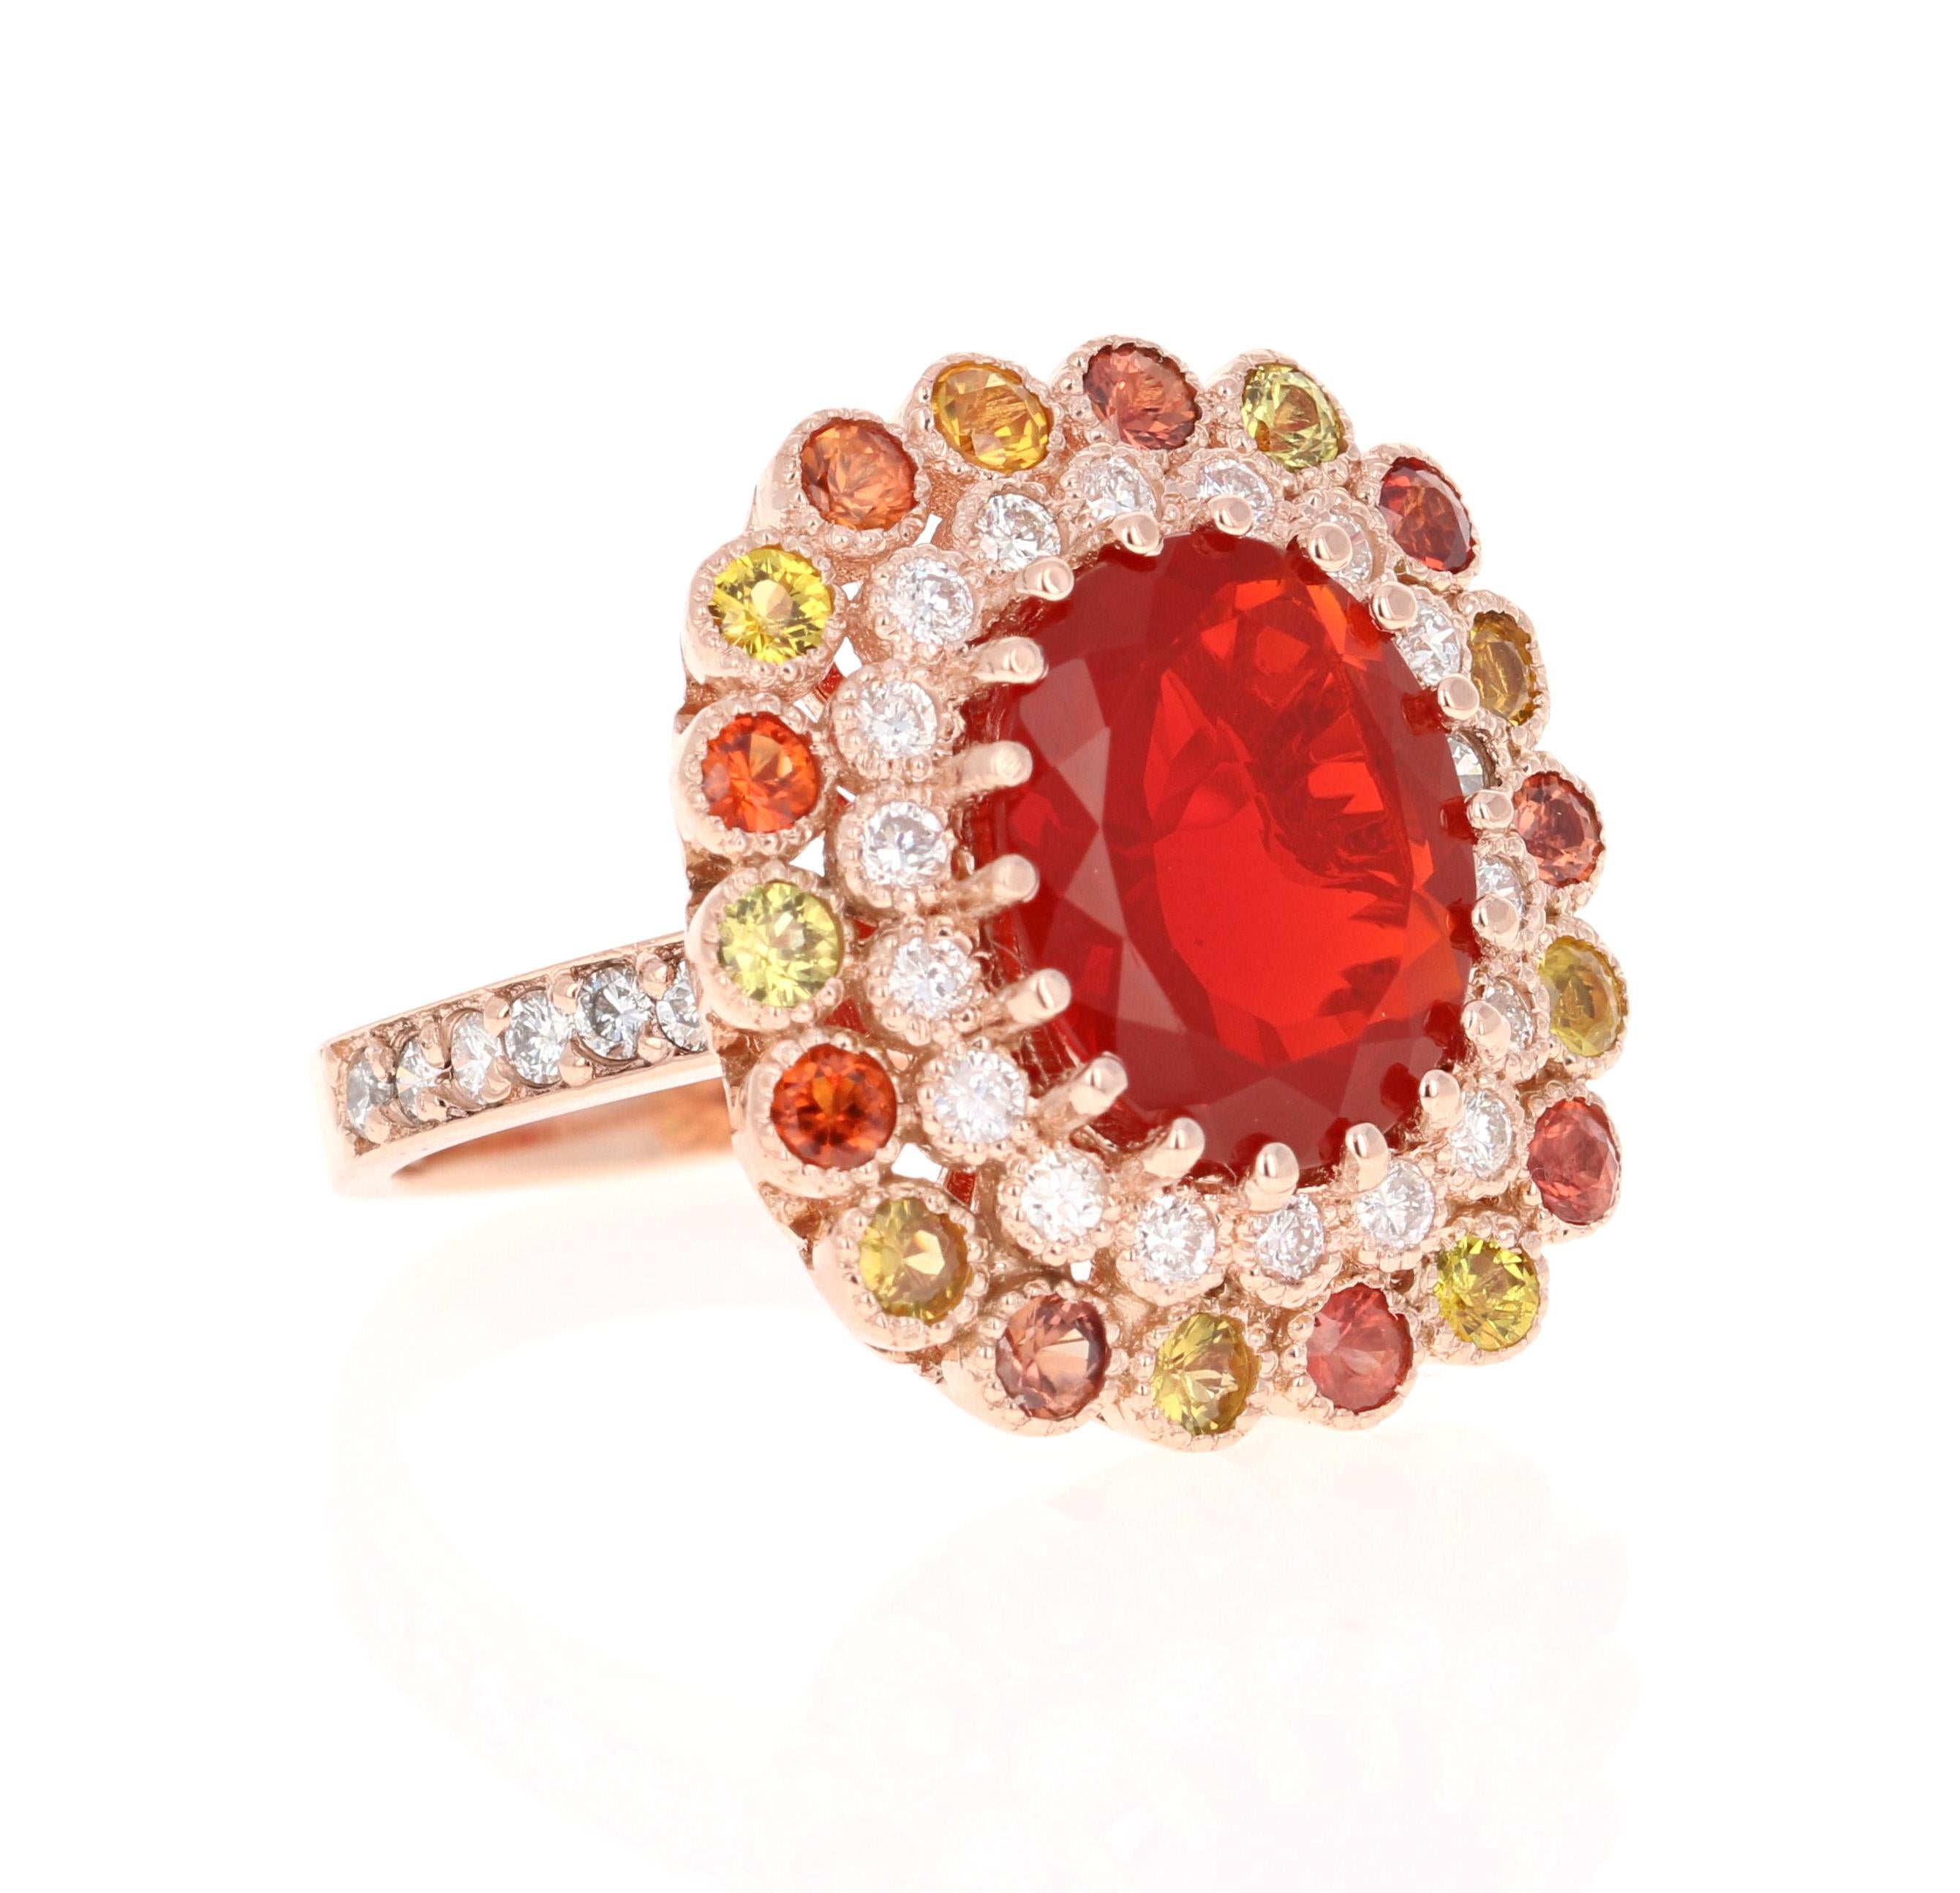 Super gorgeous and uniquely designed 5.06 Carat Fire Opal and Multi-Colored Sapphire and Diamond 14K Rose Gold Cocktail Ring!

This ring has a 2.92 carat Oval Cut Fire Opal as its center stone and is elegantly surrounded by 18 Round Cut